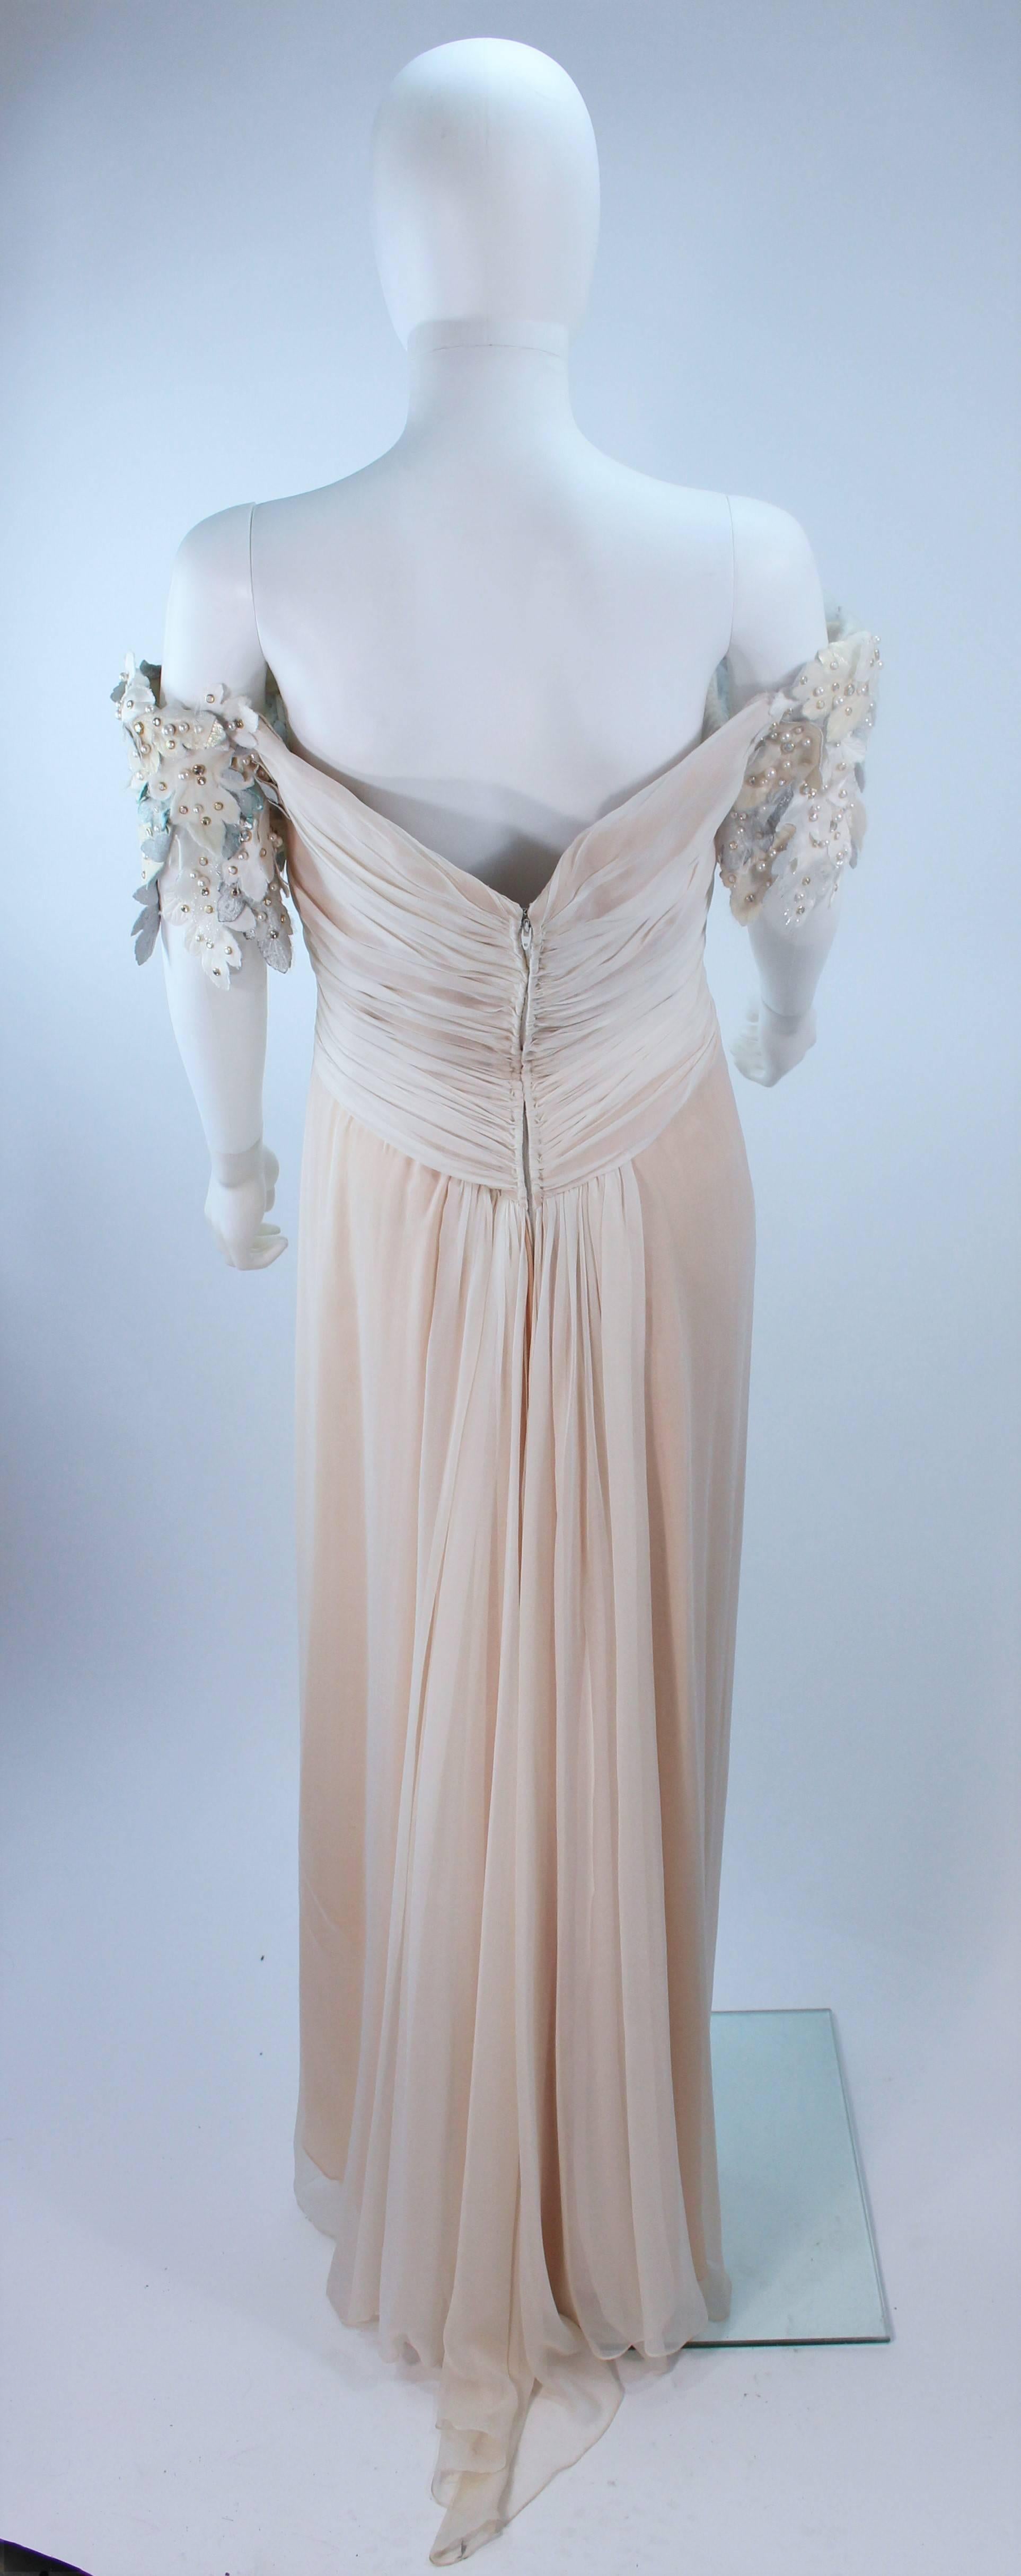 BOB MACKIE Silk Chiffon Gown with Multi-Texture Floral Applique Size 2 4